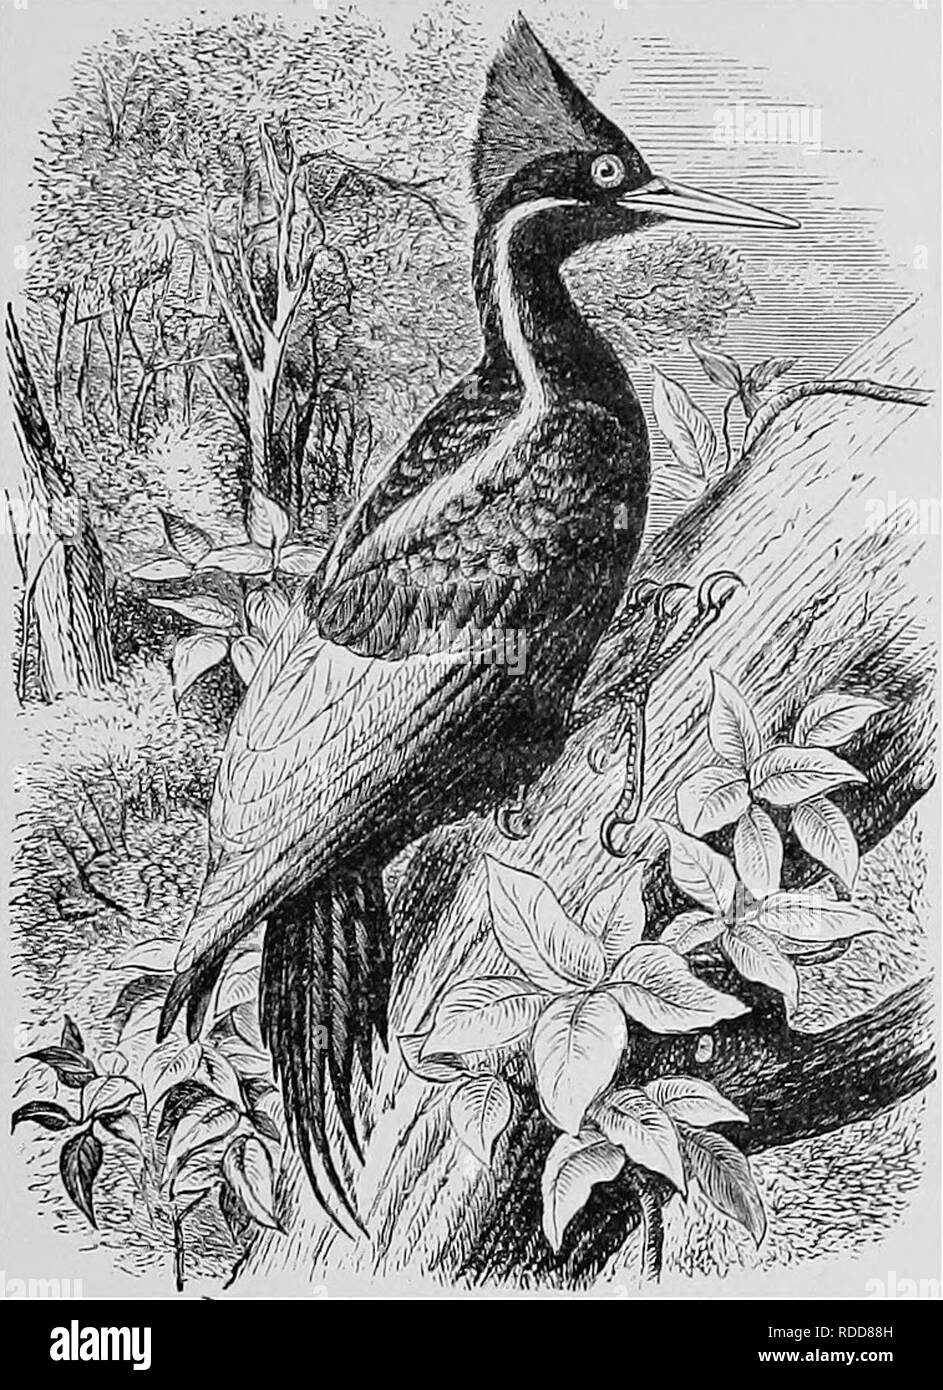 . A popular handbook of the ornithology of the United States and Canada, based on Nuttall's Manual. Birds; Birds. IVORY-BILLED WOODPECKER. Campephilus principalis. Char. Glossy black; white stripe from bill down sides of neck ; scap- ulars and secondaries white; bill ivory white. Male with crest of scarlet and black ; female with crest of black. Length 21 inches. Nest. In a cypress-swamp or deep forest; a cavity excavated in a live tree. Eggs. 4-6; white; 1.40 X i.oo. This large and splendid bird is a native of Brazil, Mexico, and the Southern States, being seldom seen to the north of Virginia Stock Photo